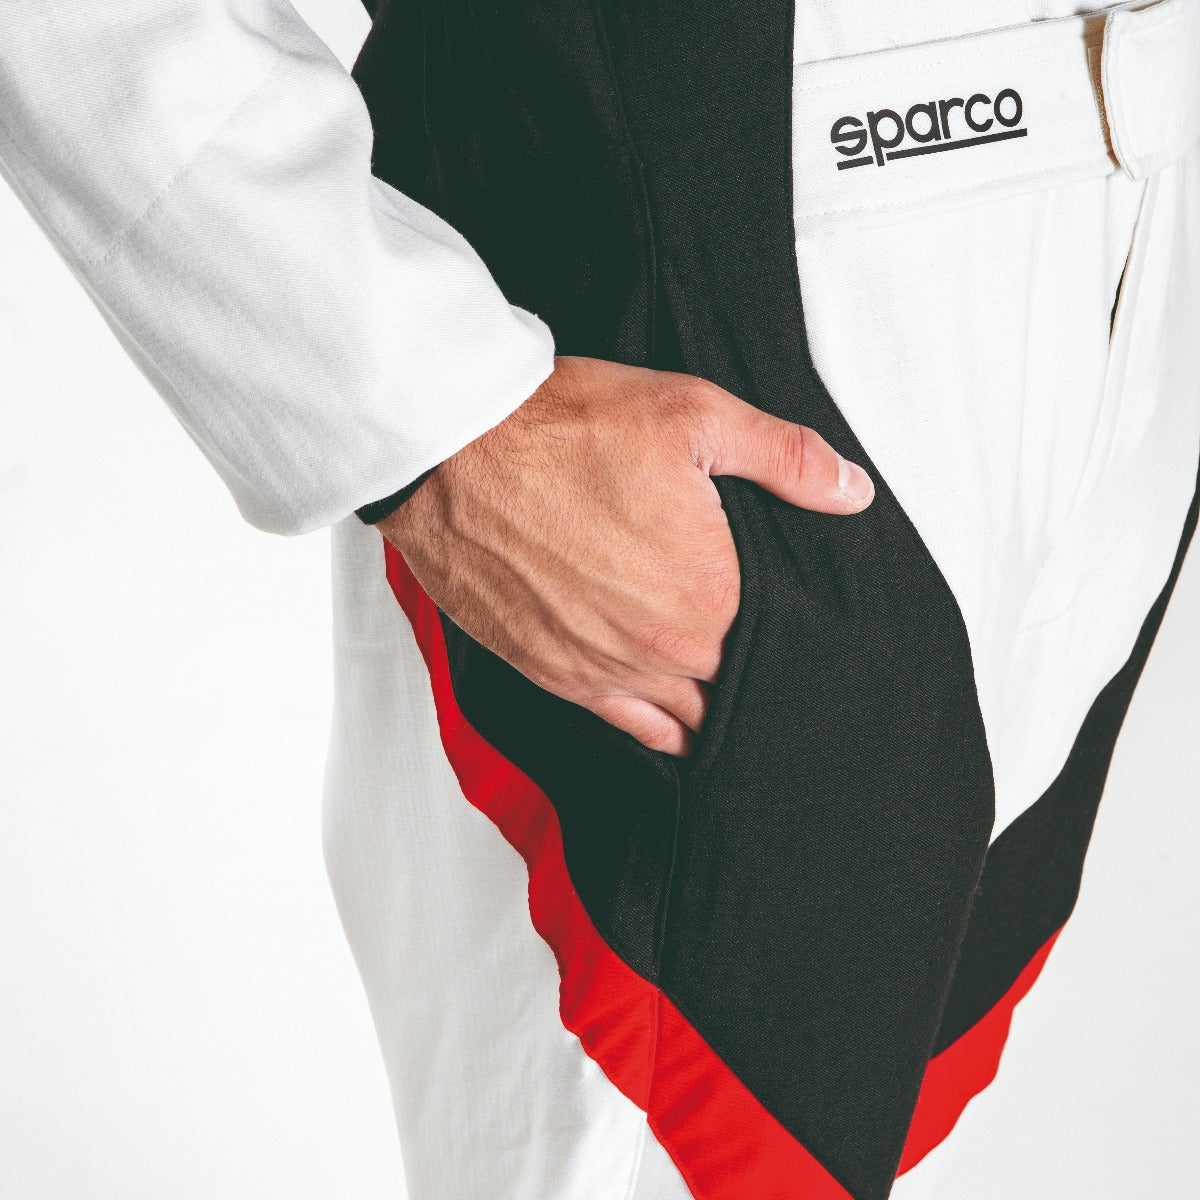 SPARCO VICTORY 2.0 RACE SUIT REVIEWSIMAGE